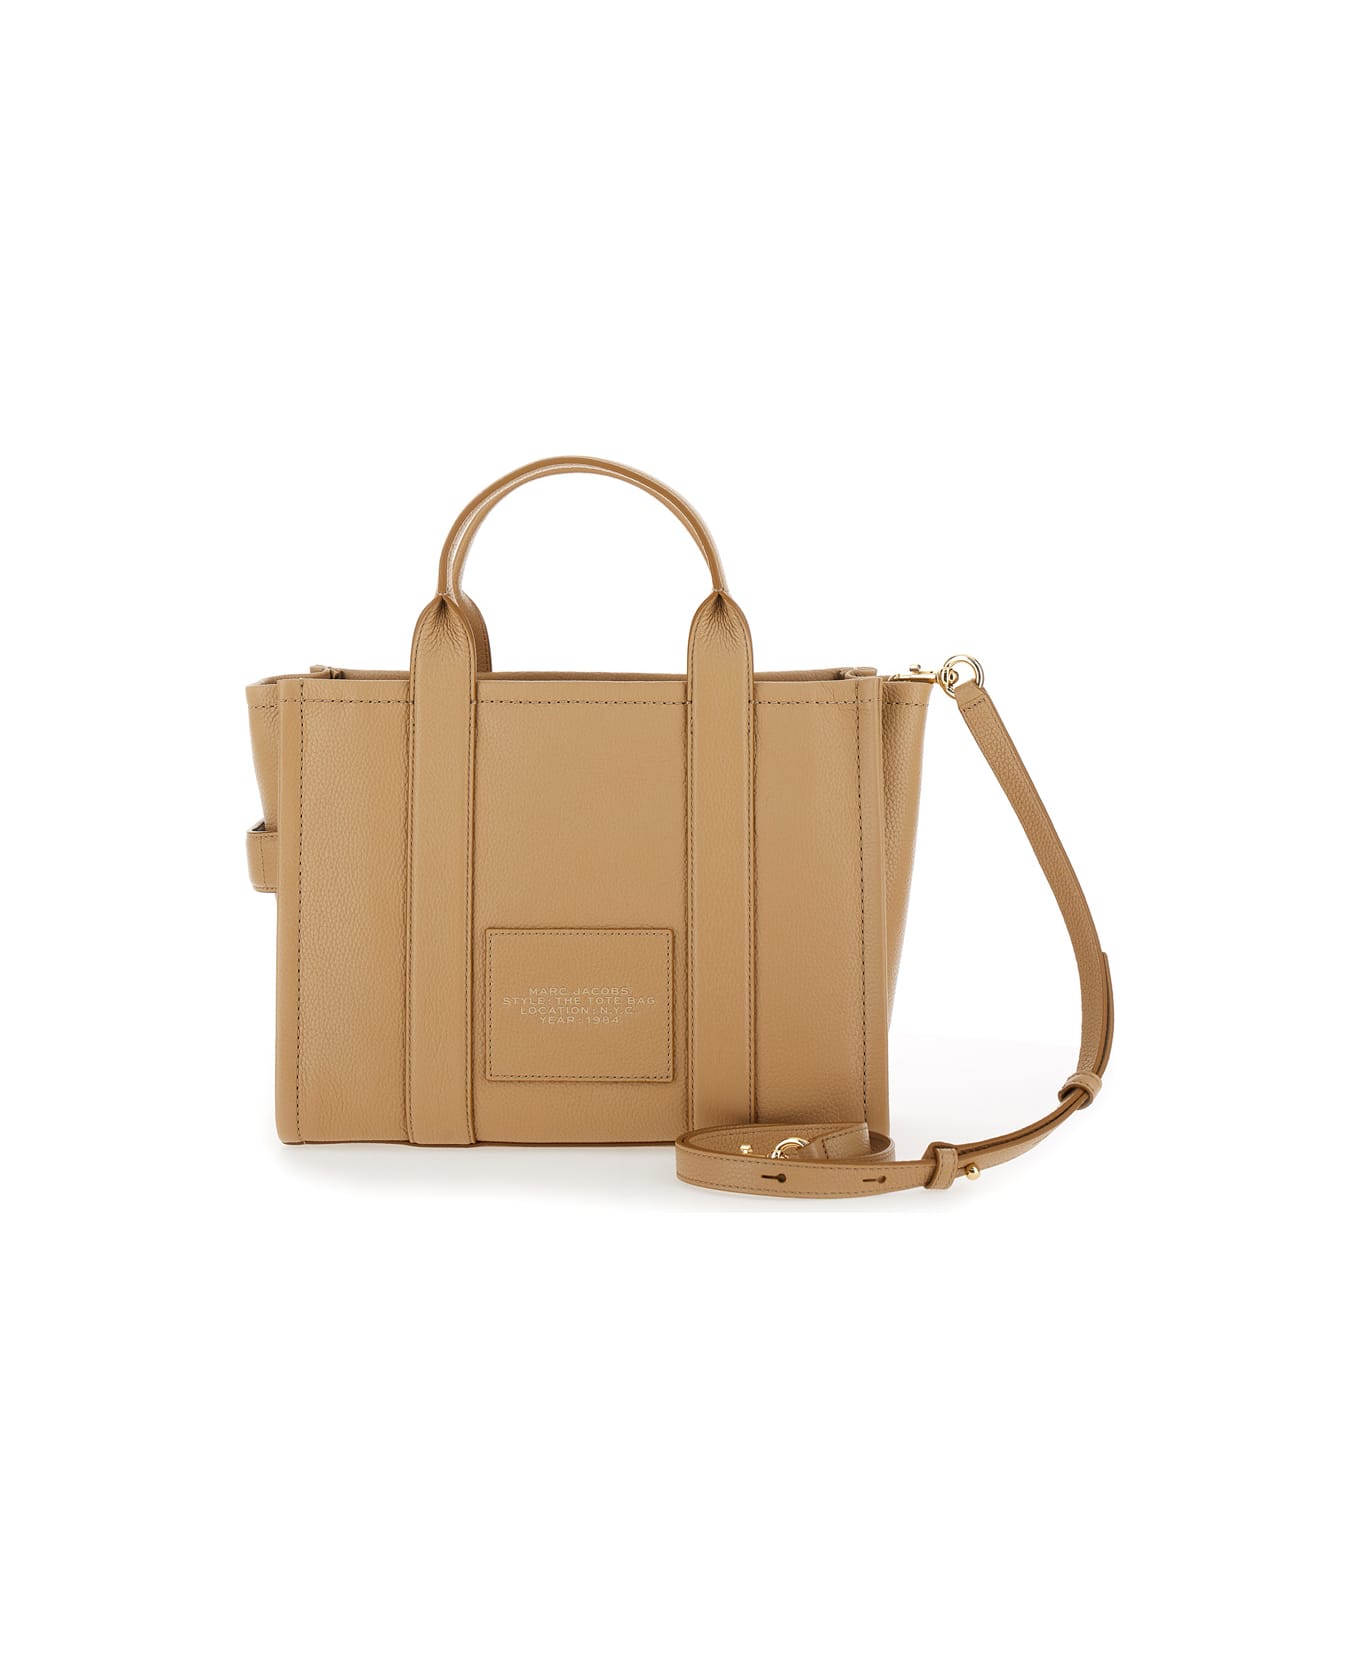 Marc Jacobs 'the Medium Tote Bag' Beige Shoulder Bag With Logo In Grainy Leather Woman - Beige トートバッグ